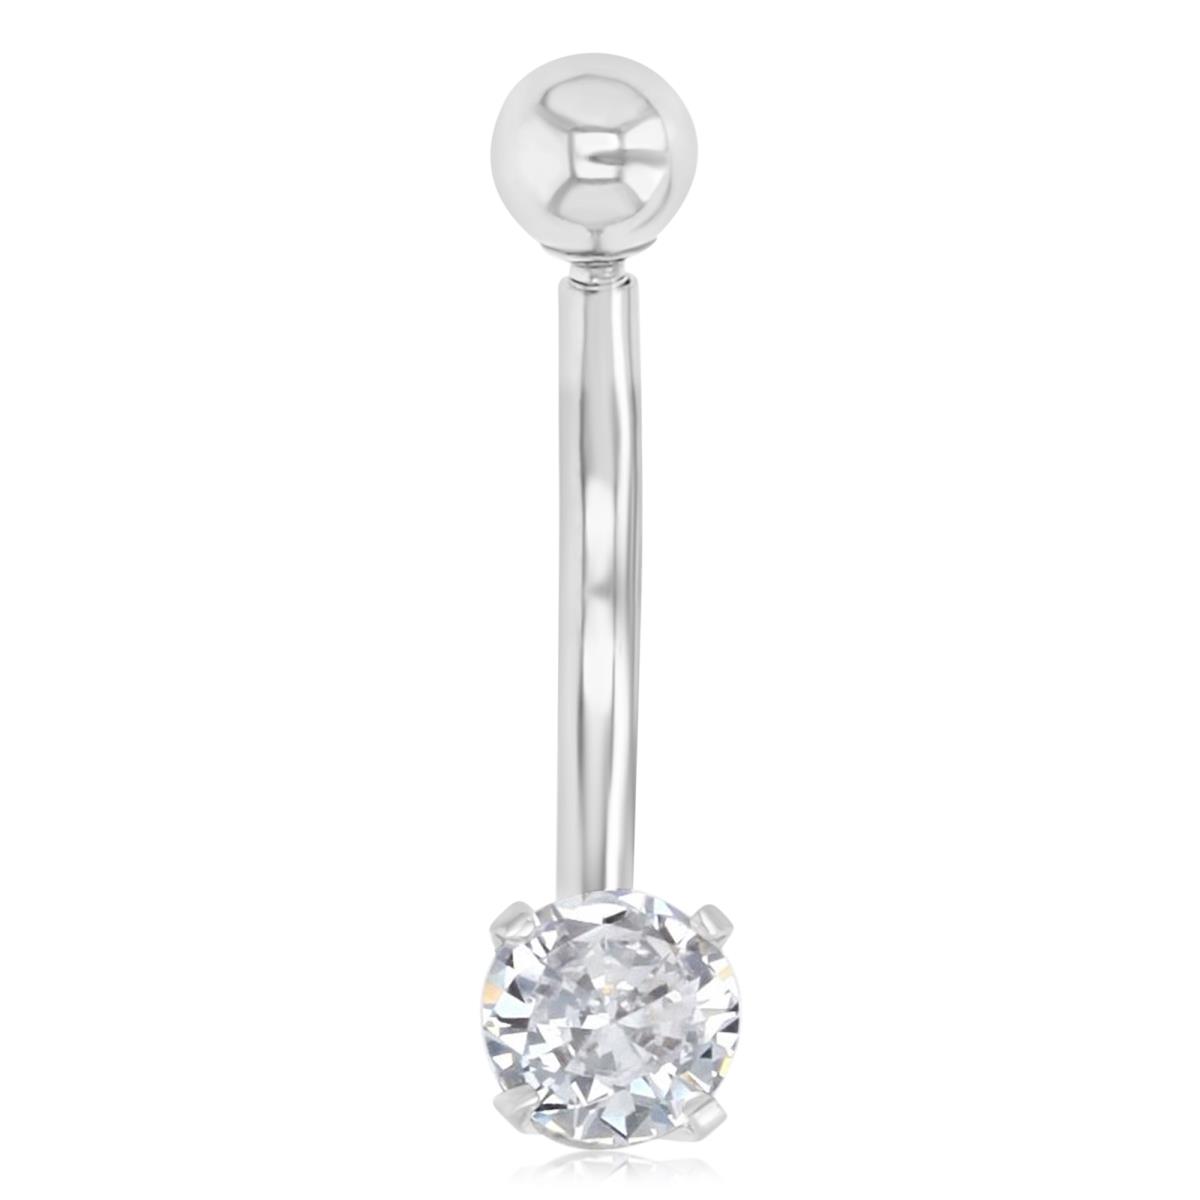 10K White Gold Polished 20MM Ball & White CZ Screw Belly Ring